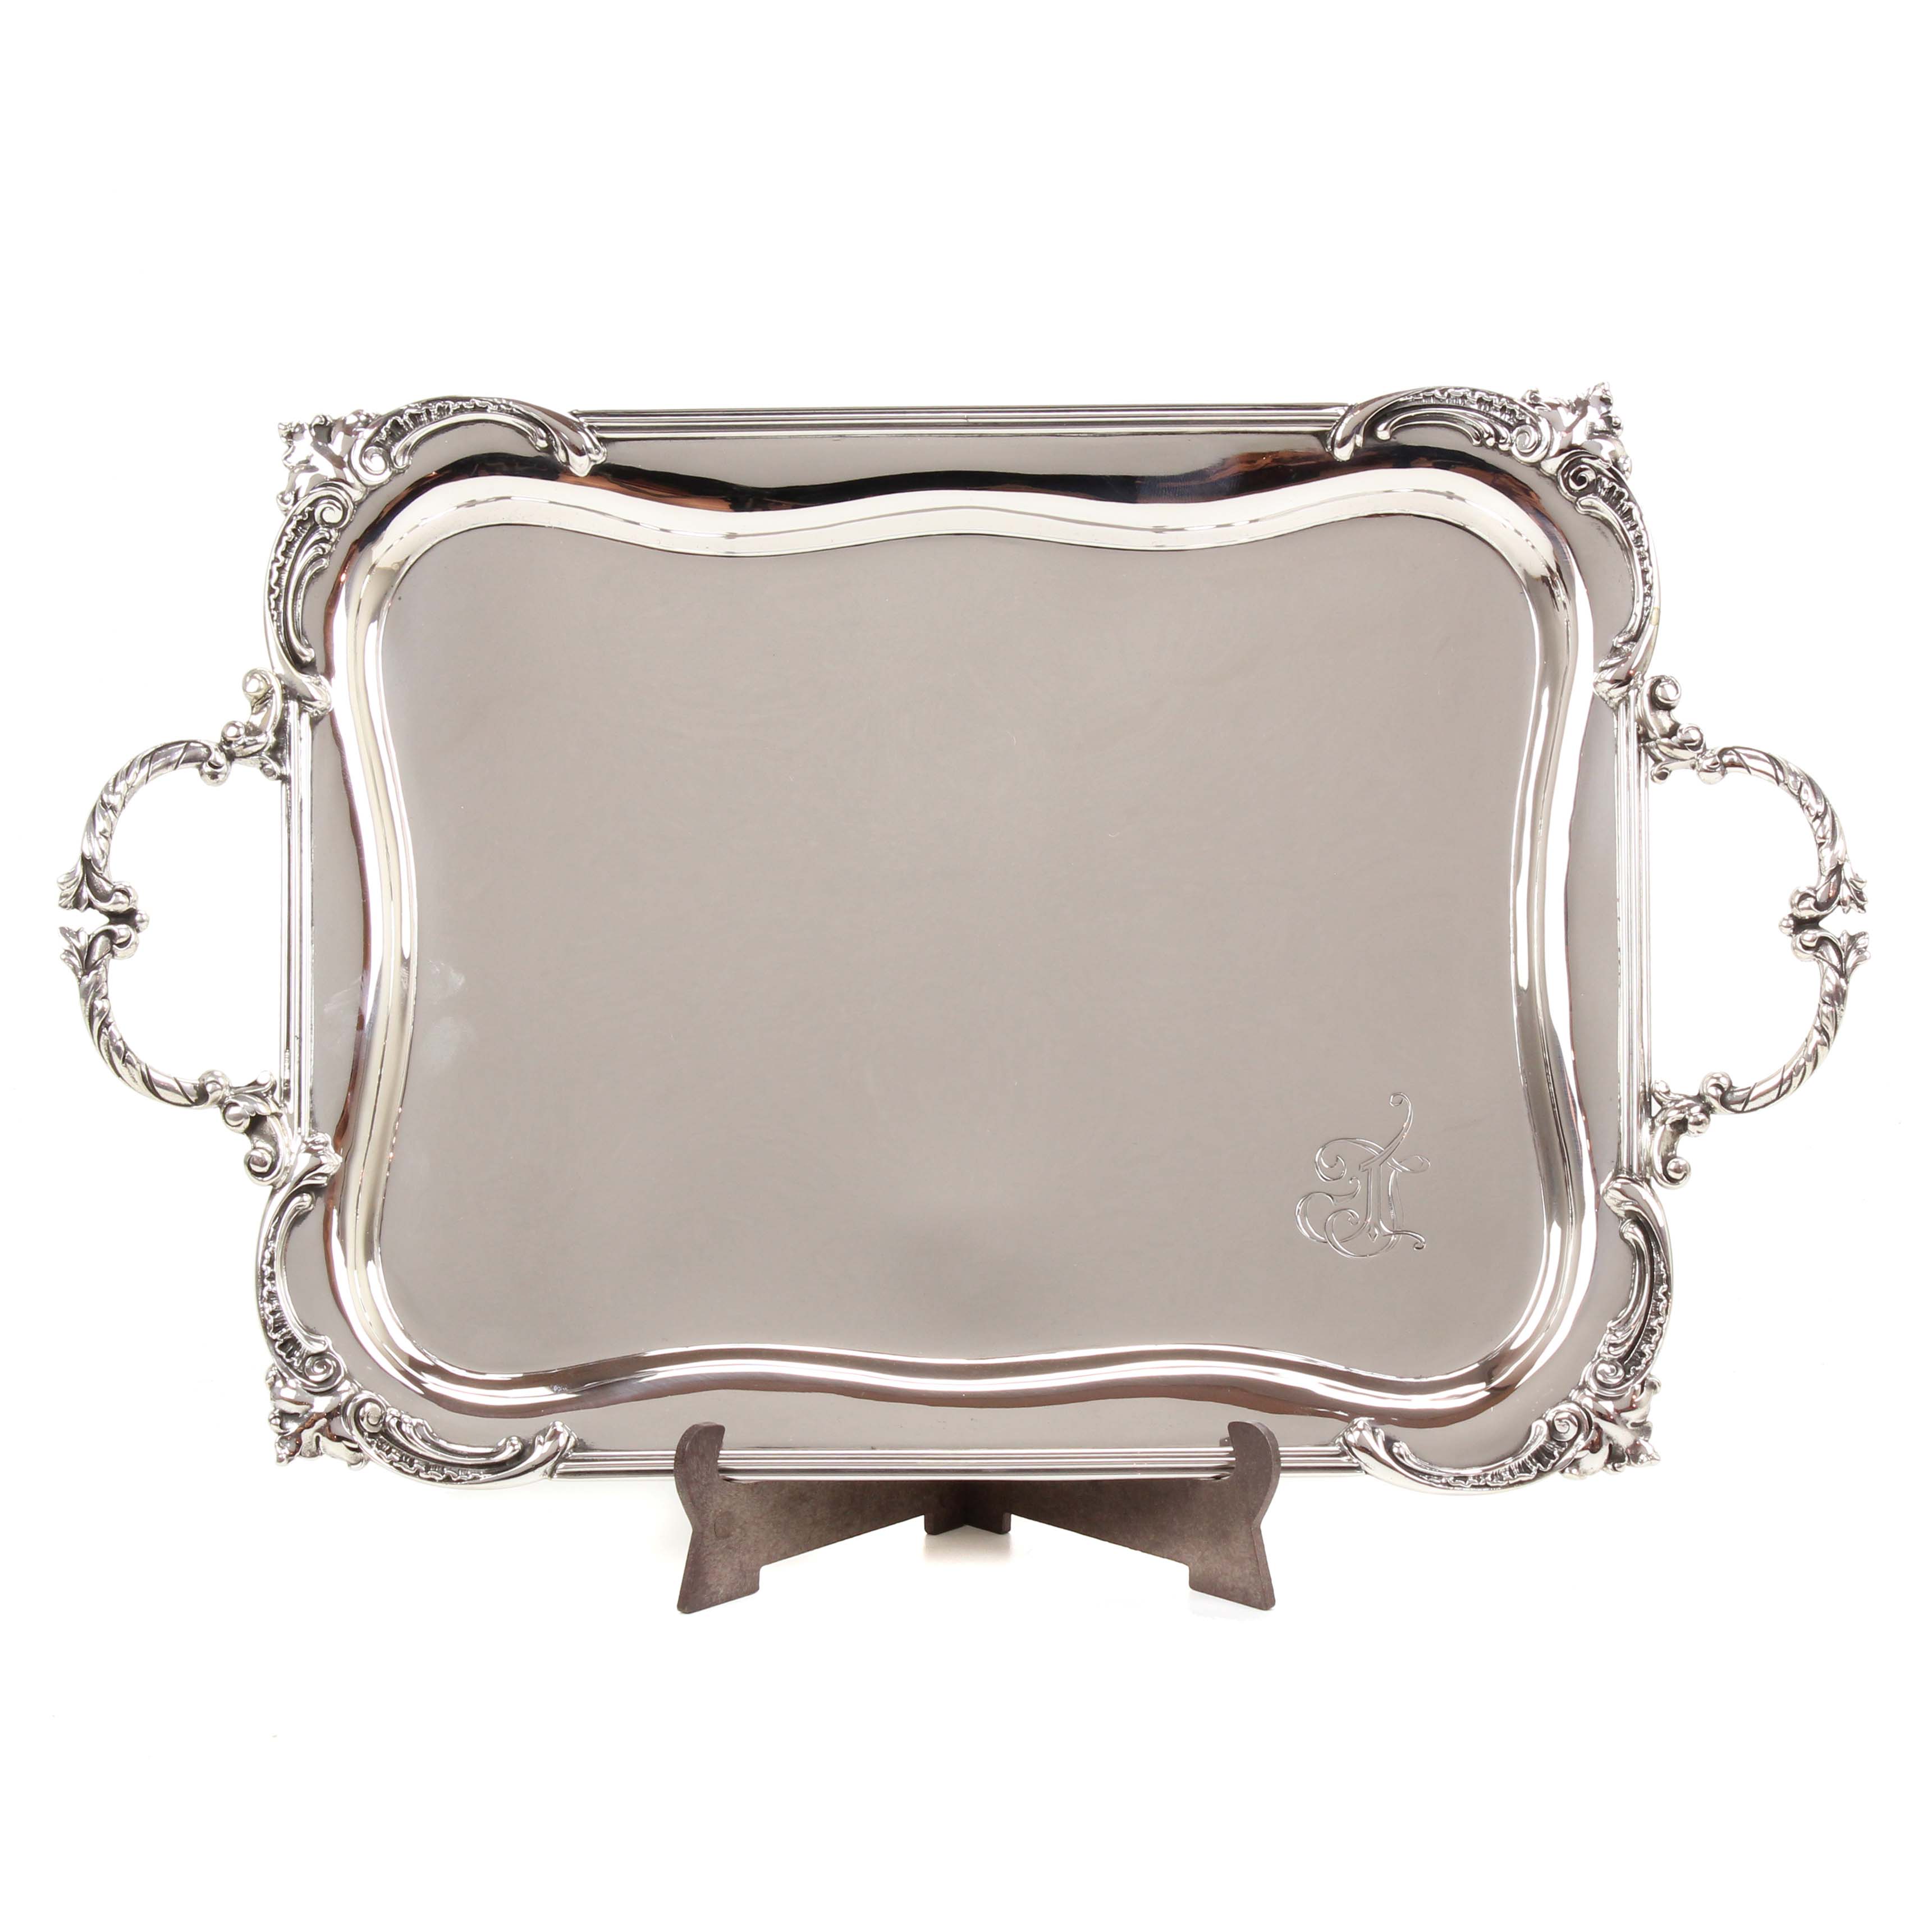 IMPERIAL RUSSIAN SILVER TRAY, 1878